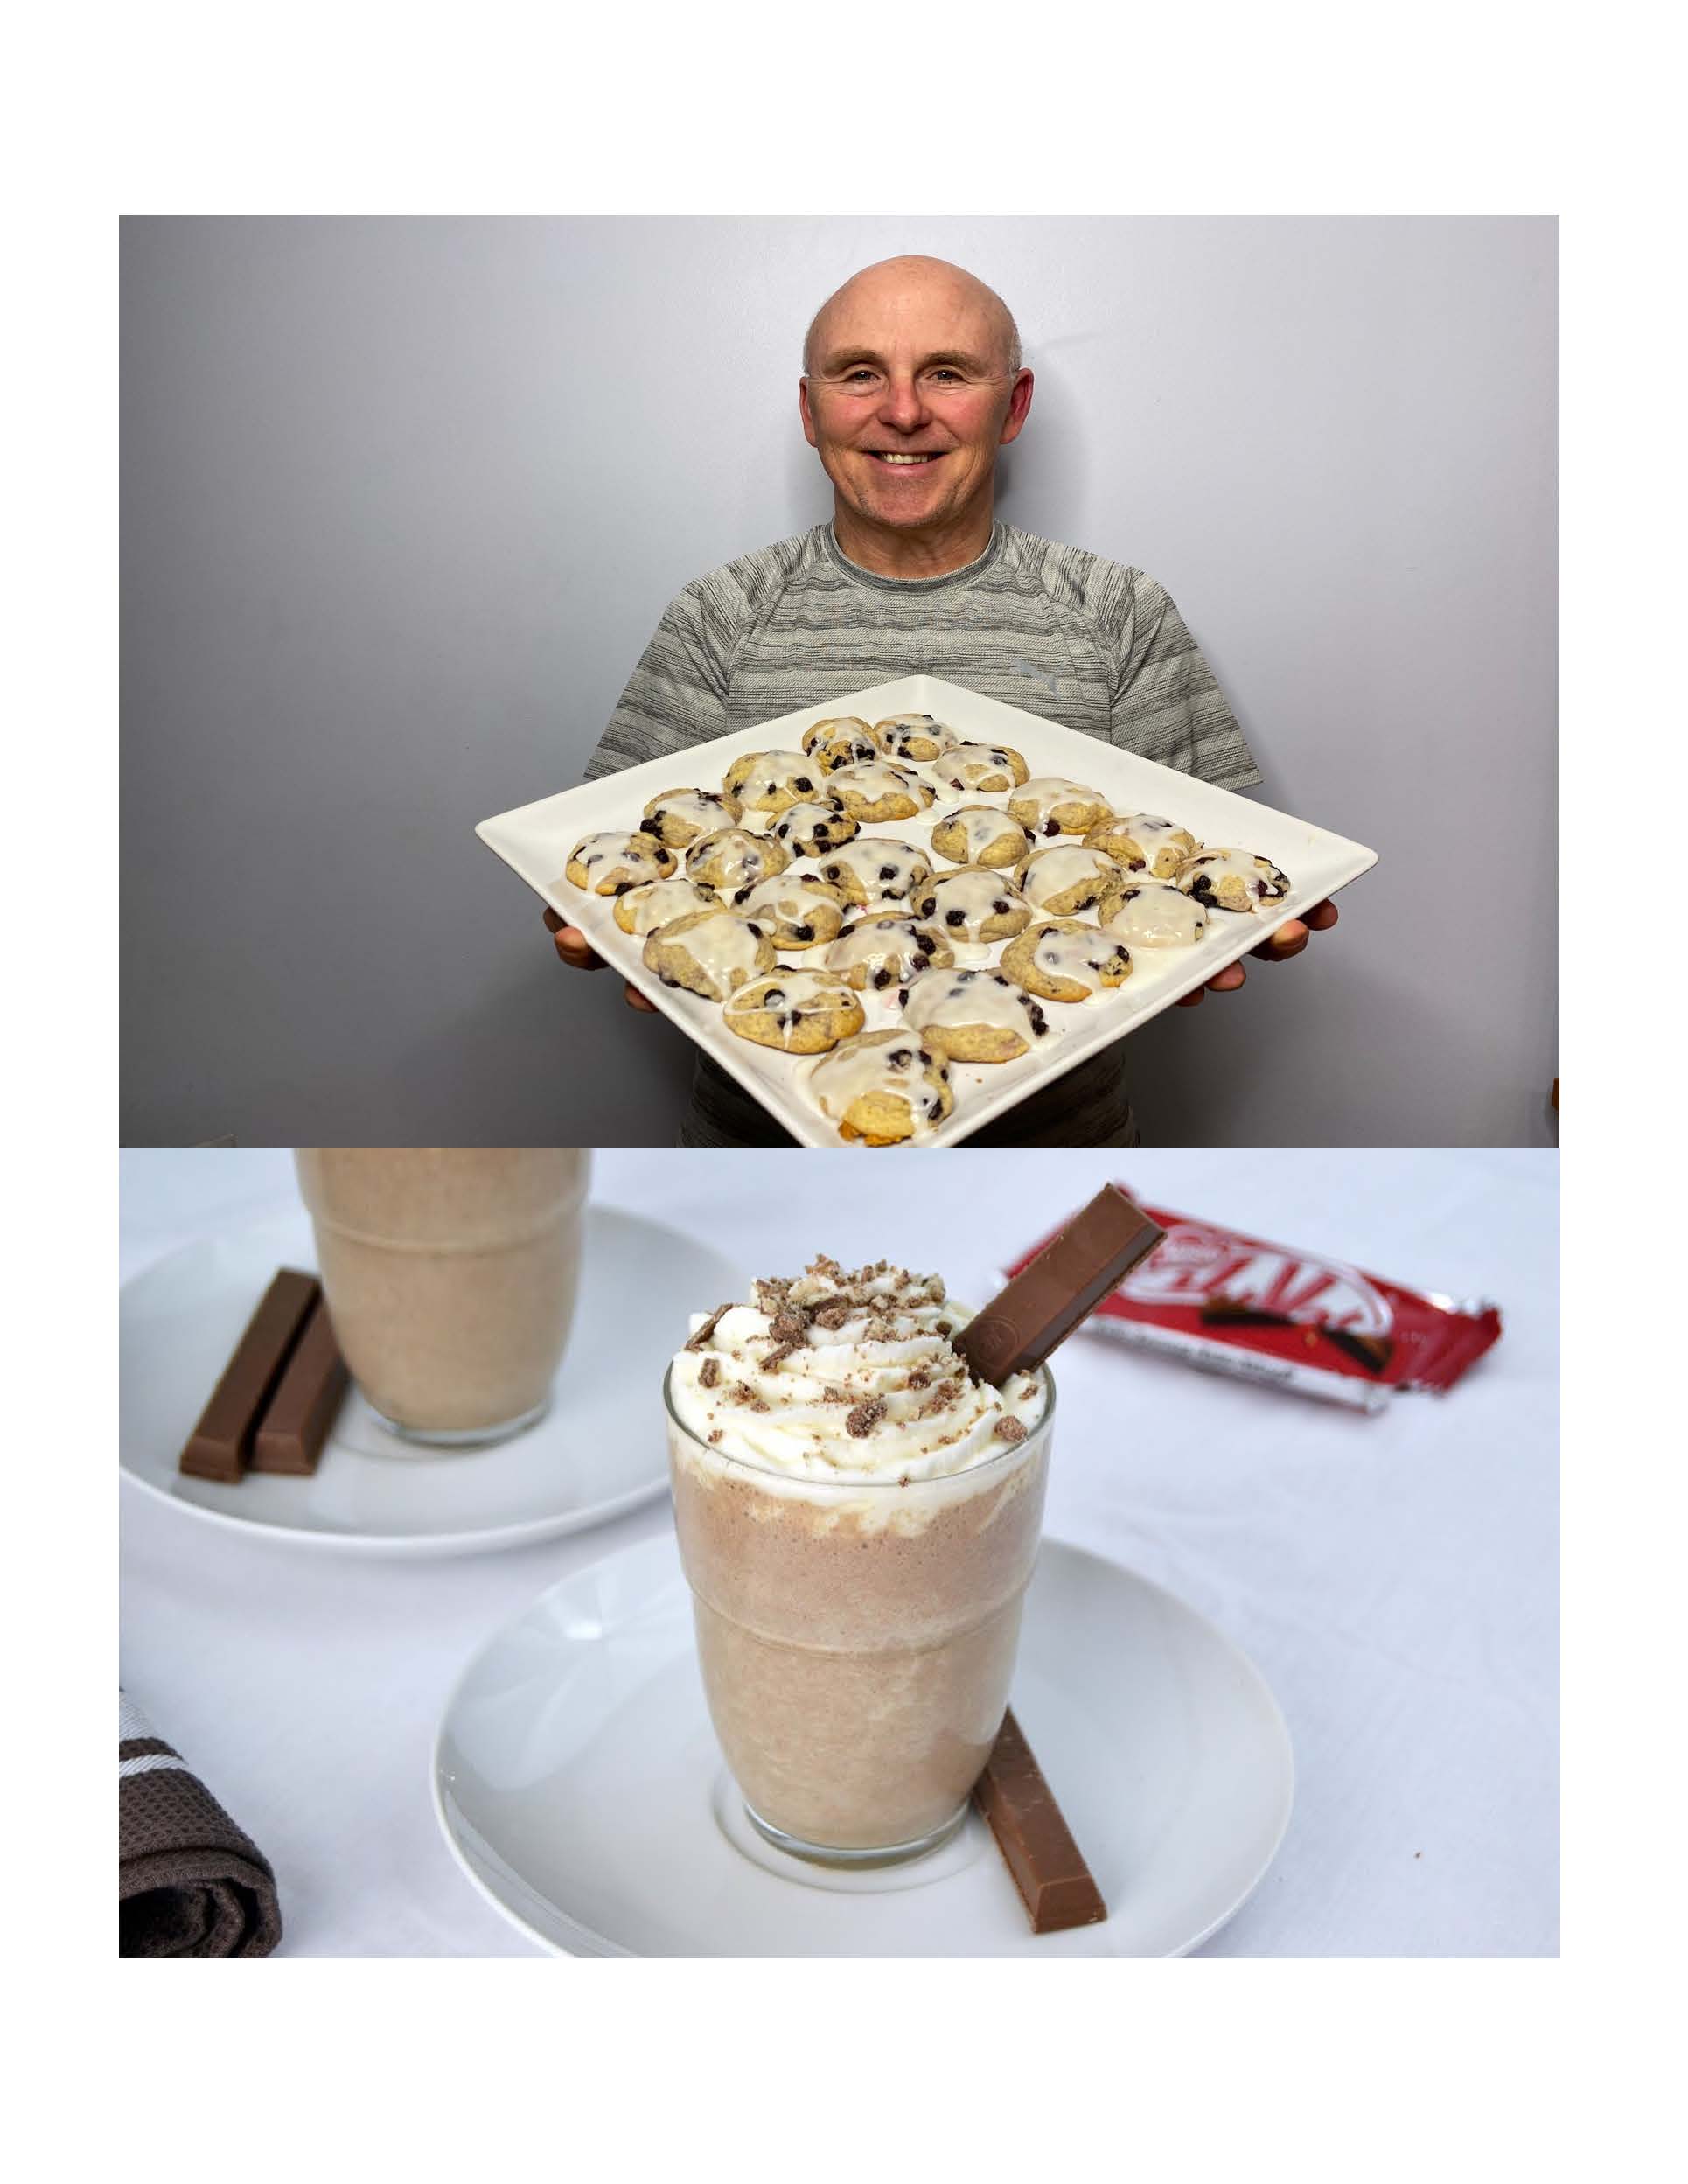 Image of Rob Scott holding a tray of the cookies and then below that is an image of a Kit Kat Milkshake.